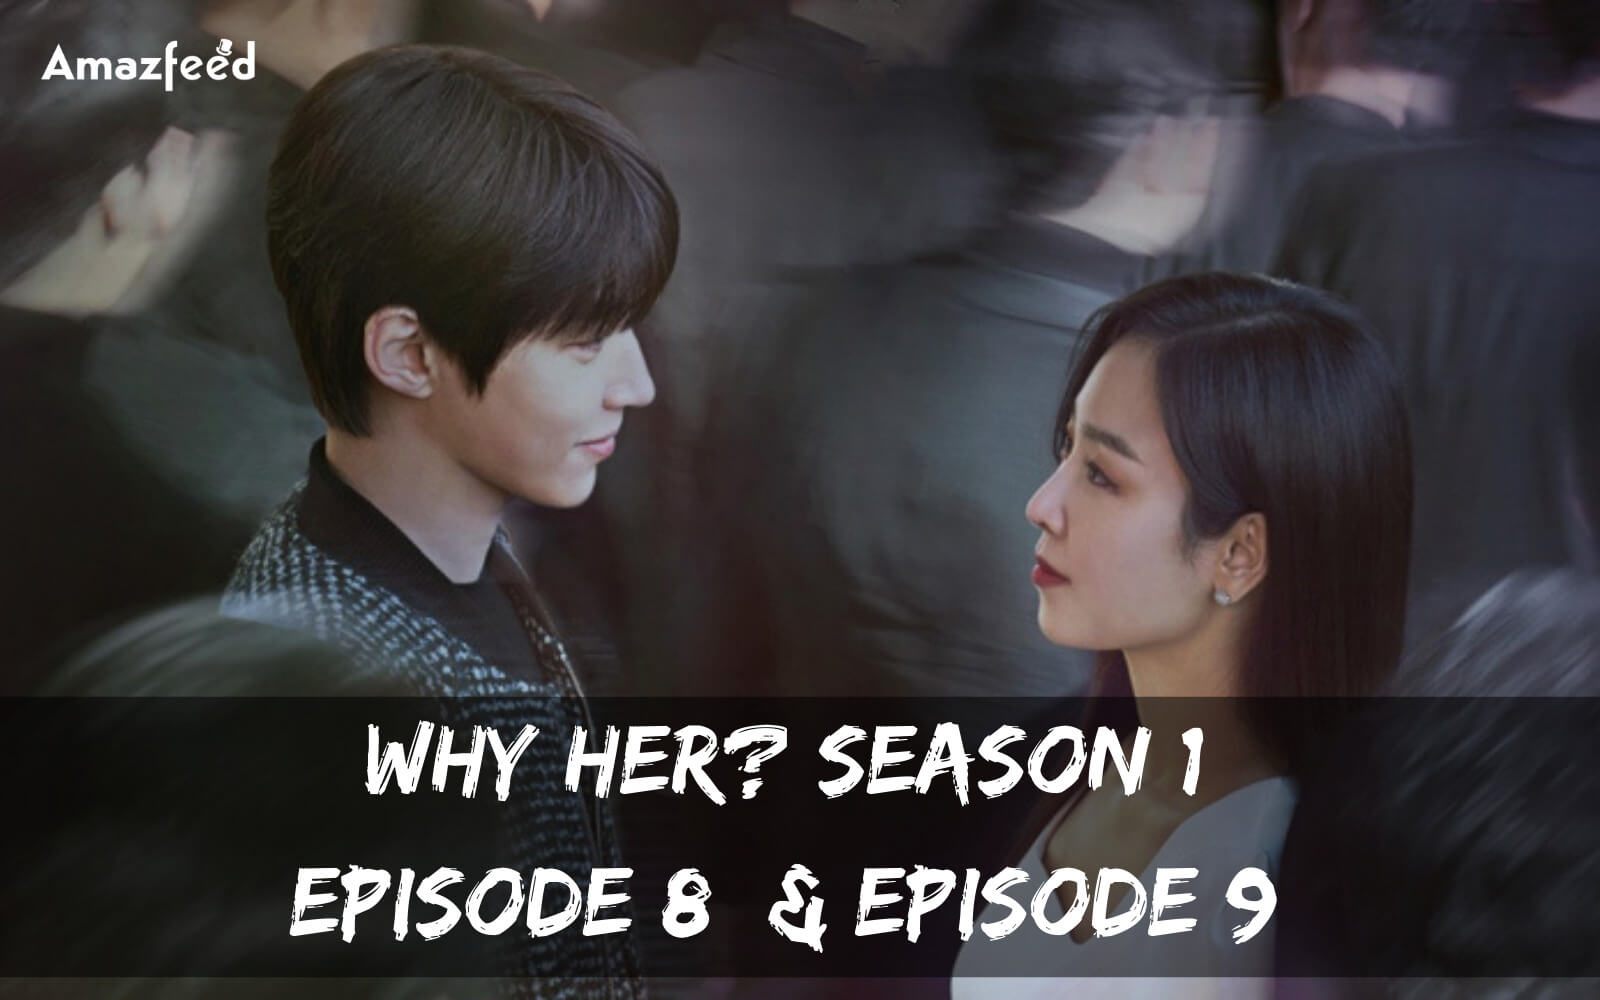 Why Her Season 1 Episode 9 release date